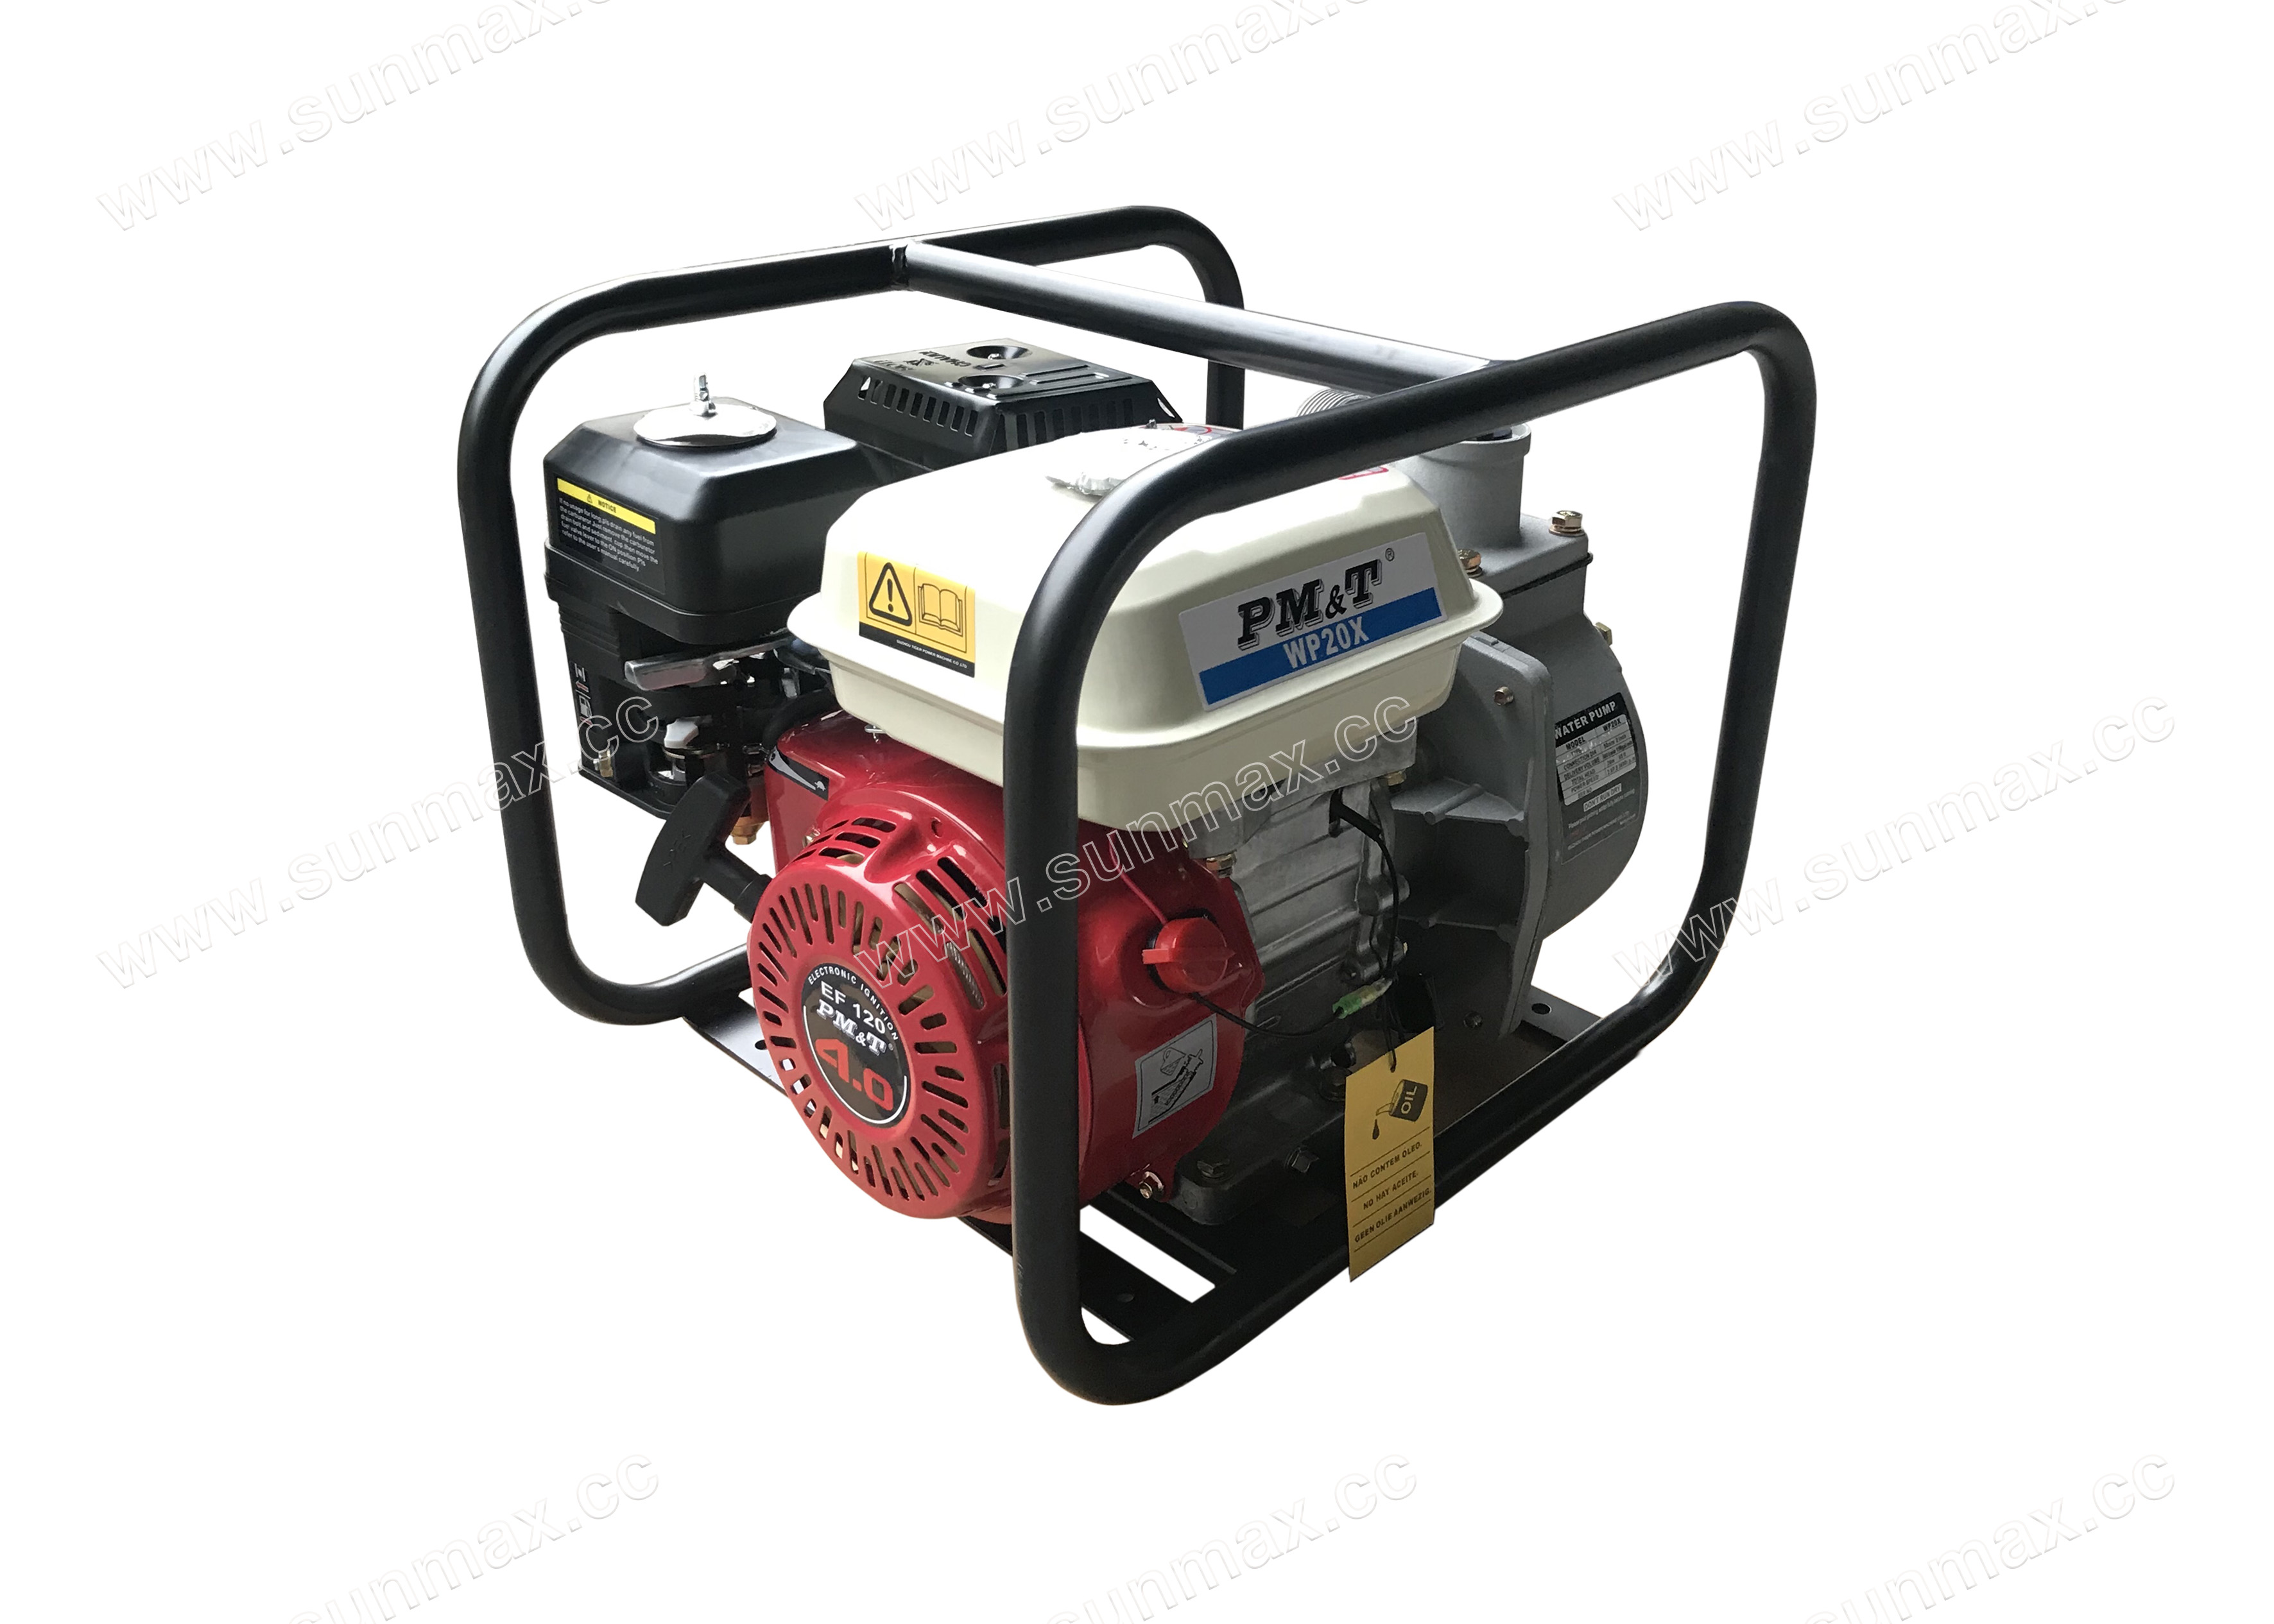 PM&T Wp20X/Wp50 Gasoline Water Pump/2 Inch 